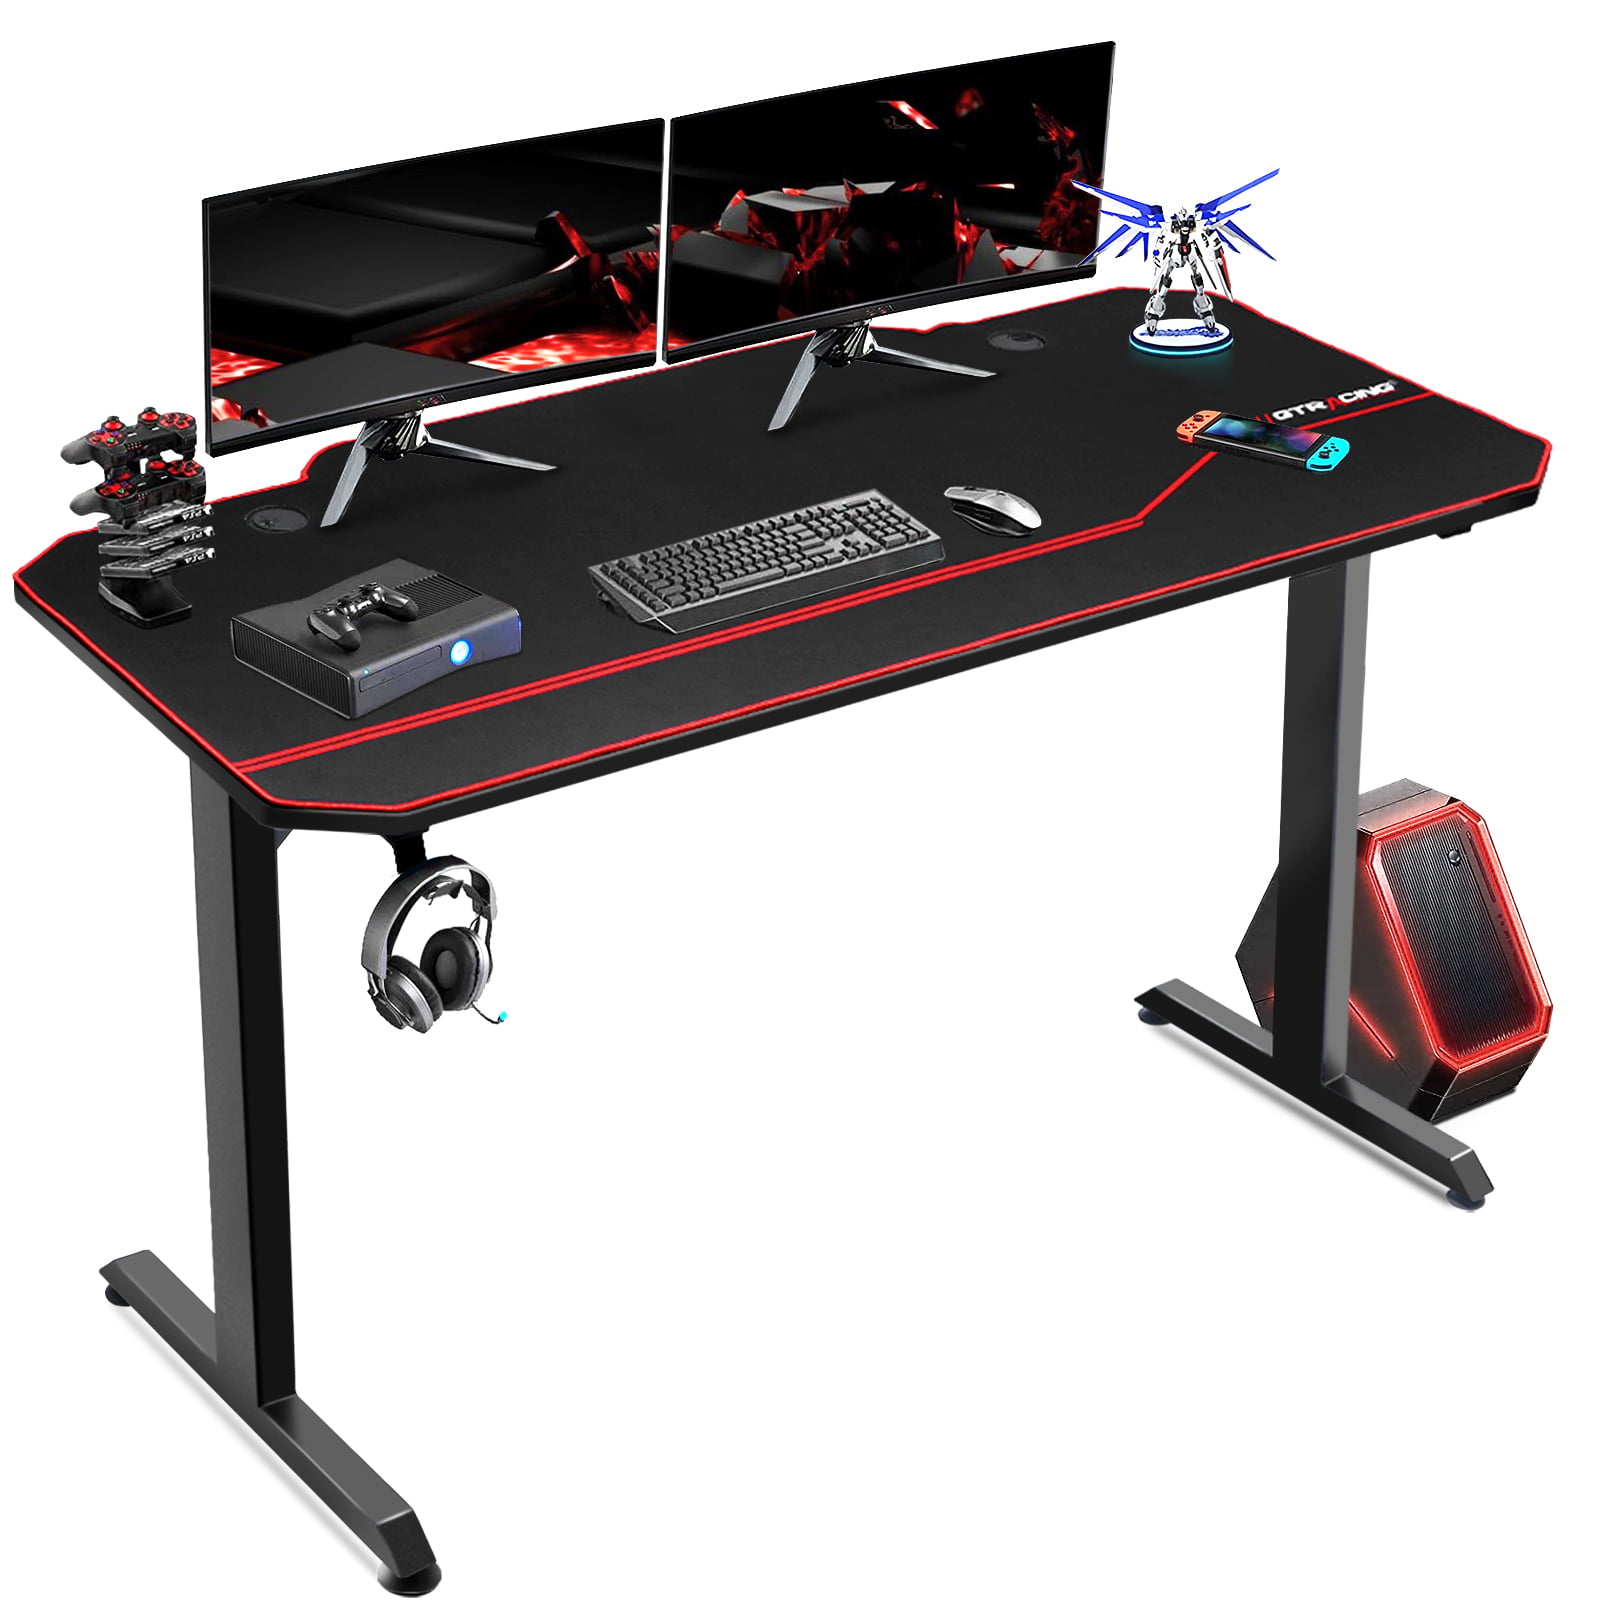 47.2 inch Computer Desk Gaming Table Racing Style Home Office Ergonomic Black US 